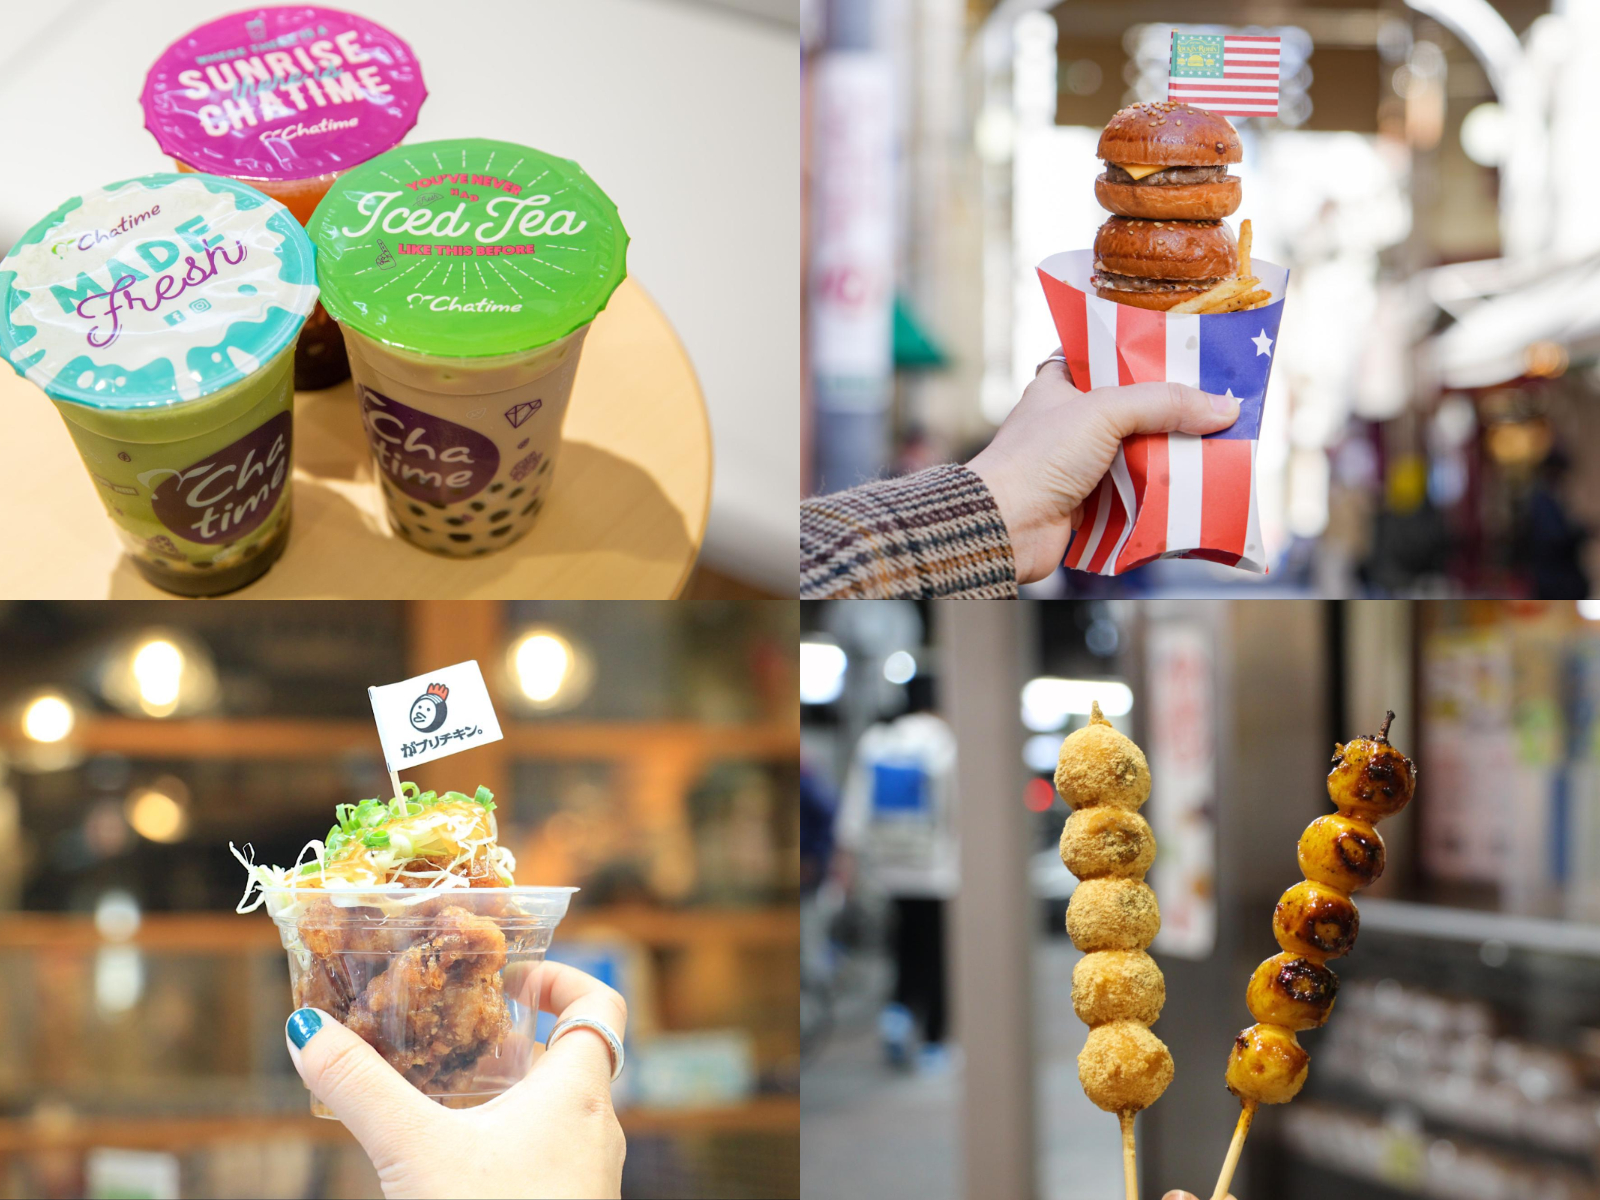 Osu, Nagoya: From the Latest to the Classic! Street Food in Osu Shopping Arcade